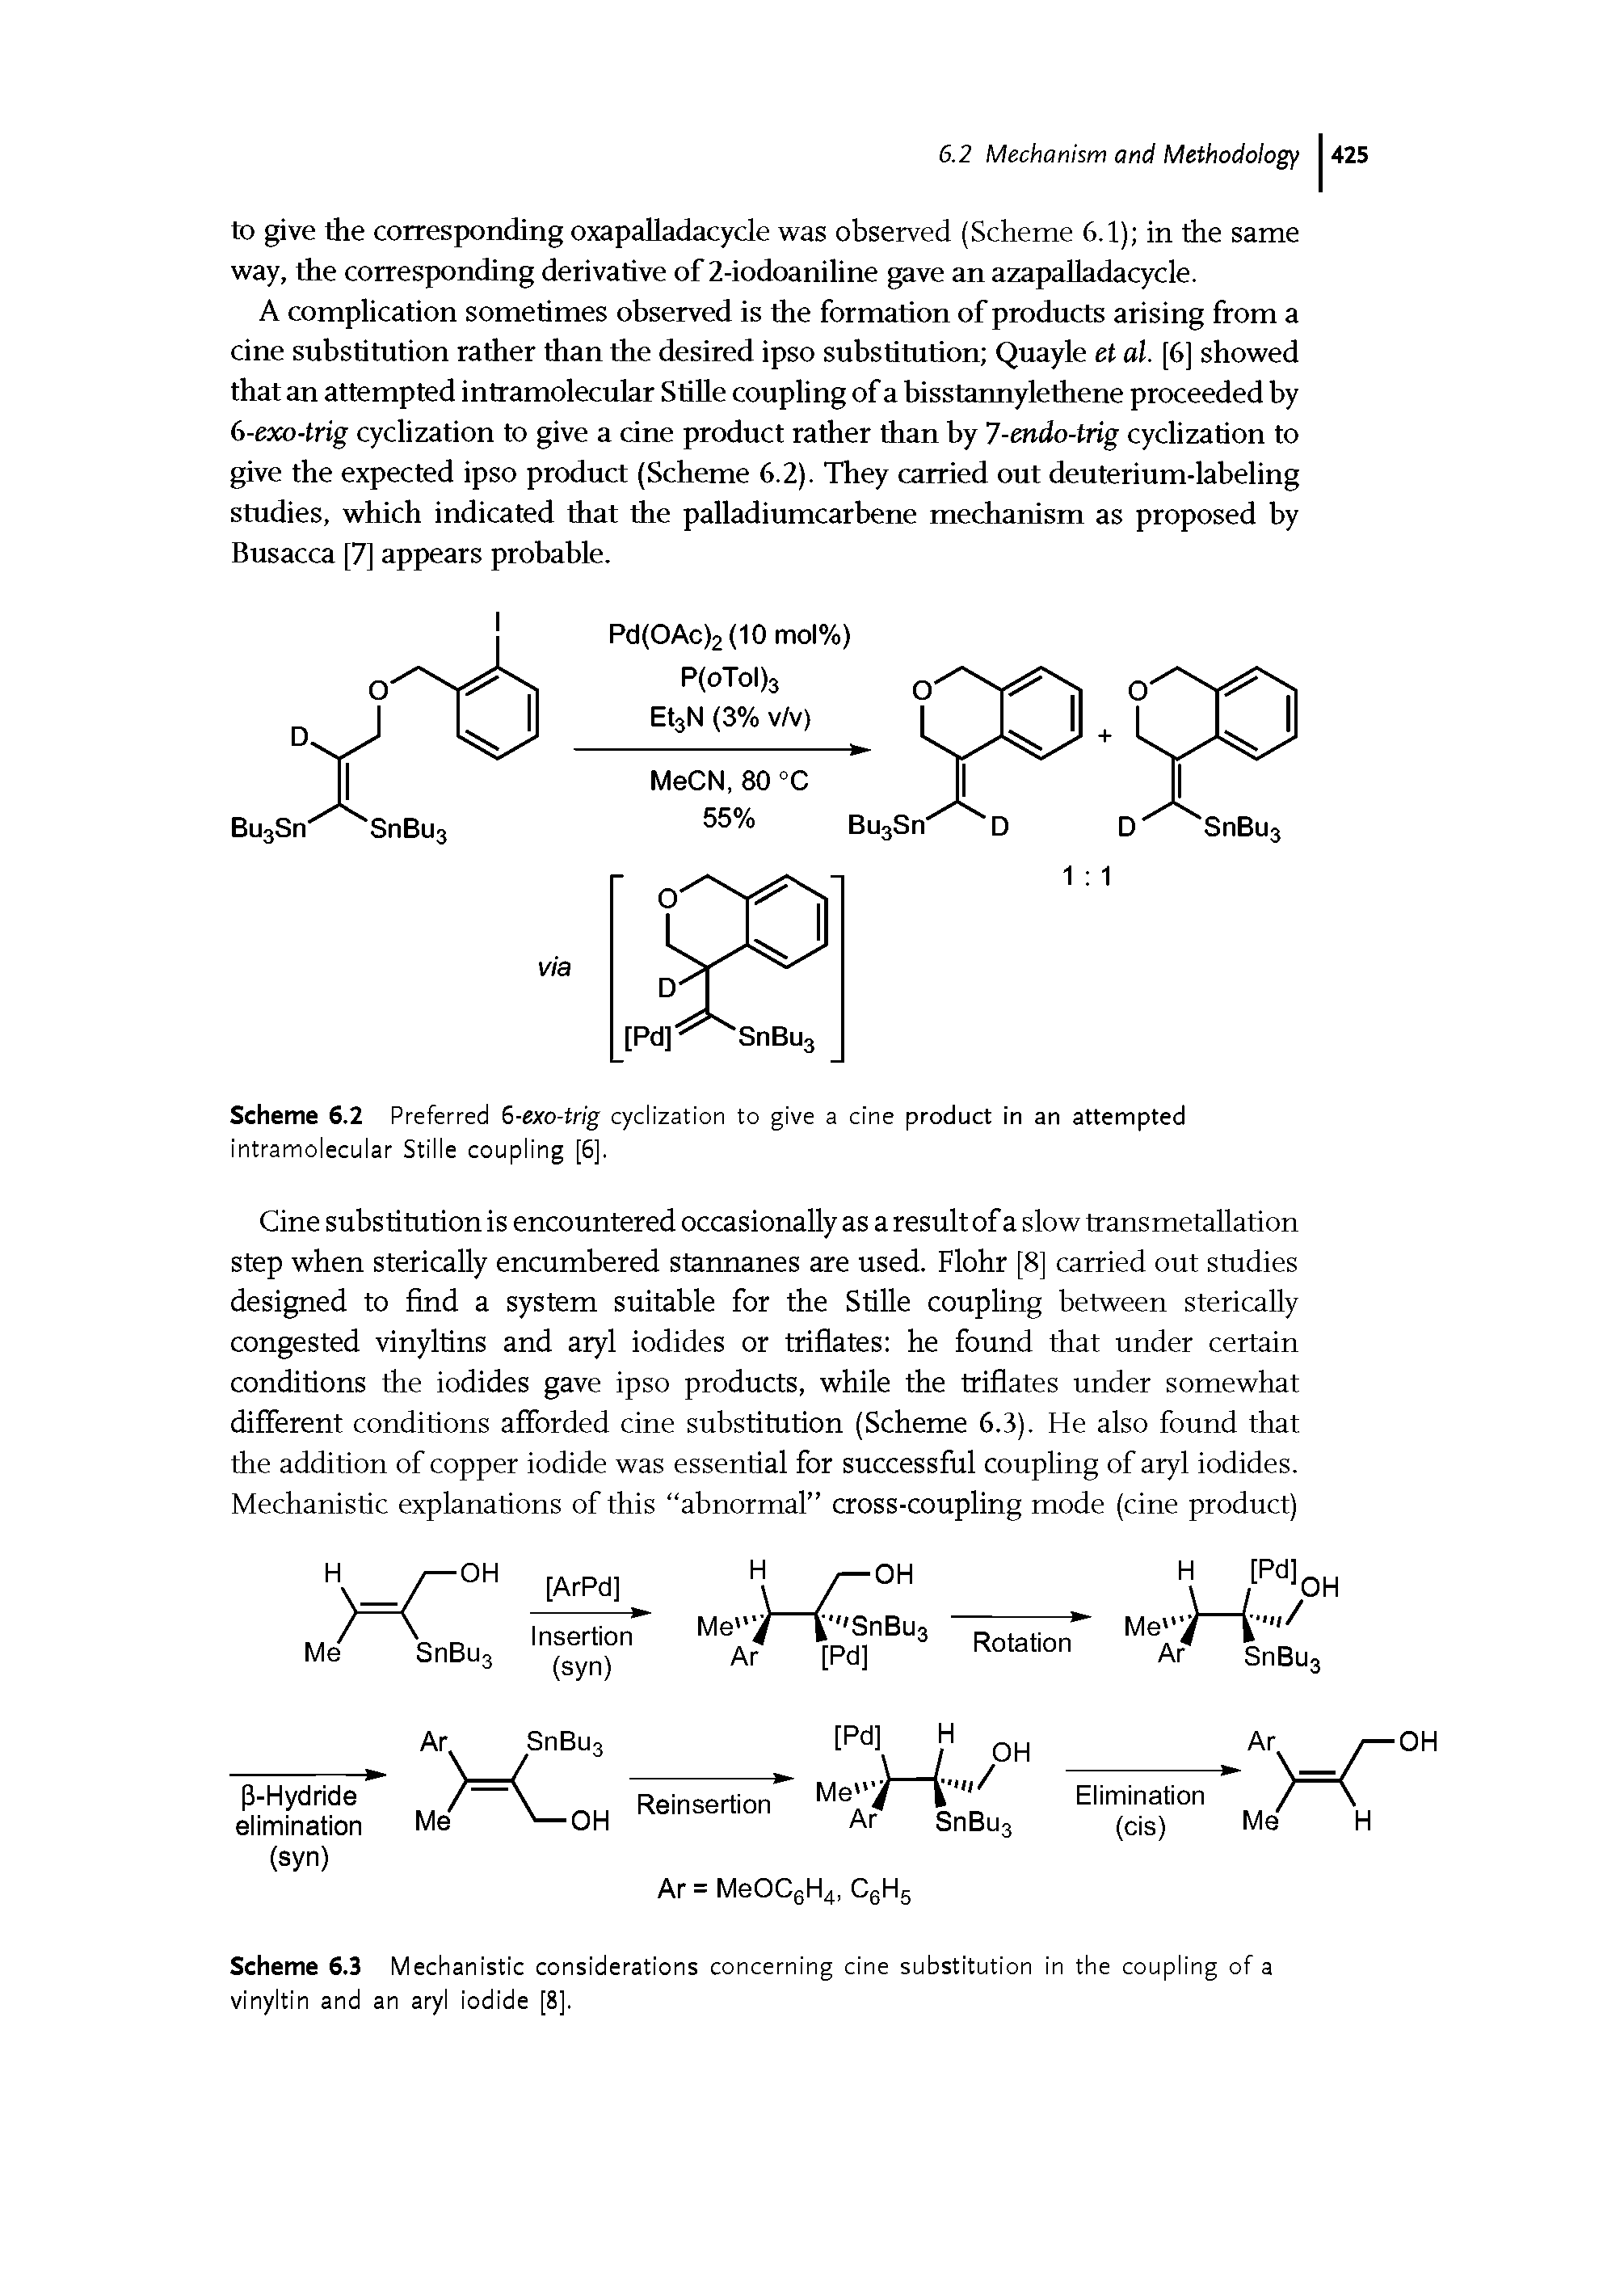 Scheme 6.3 Mechanistic considerations concerning cine substitution in the coupling of a vinyltin and an aryl iodide [8].